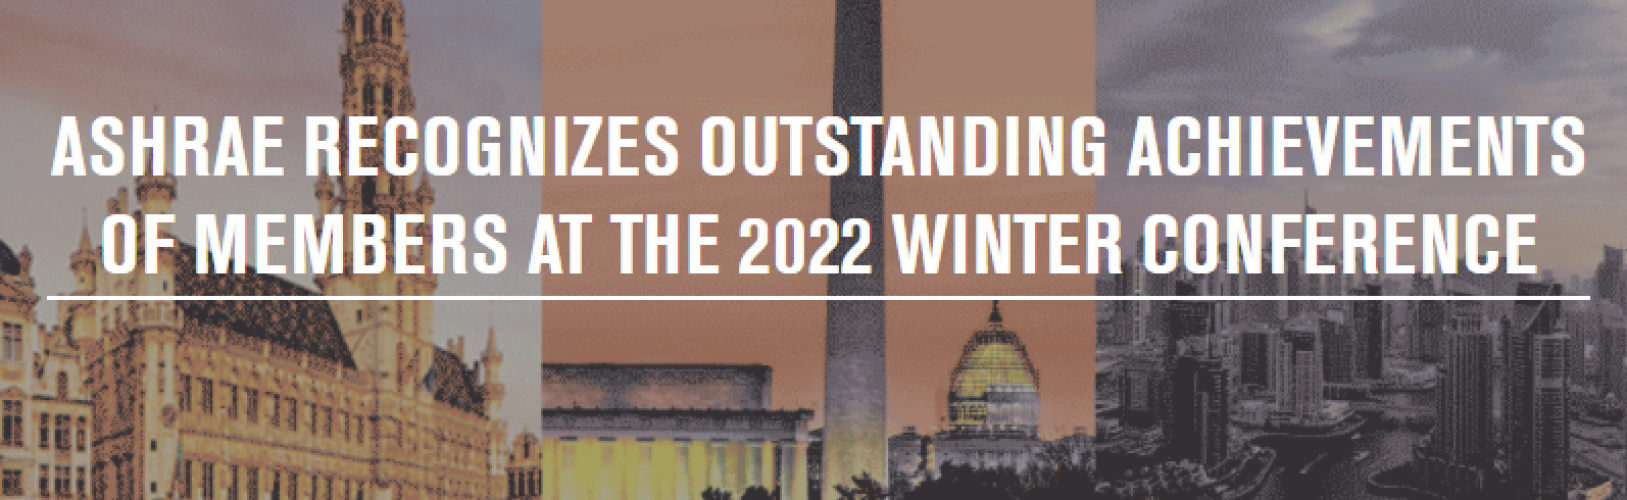 ashrae-recognizes-outstanding-achievements-of-members-at-the-2022-winter-conference